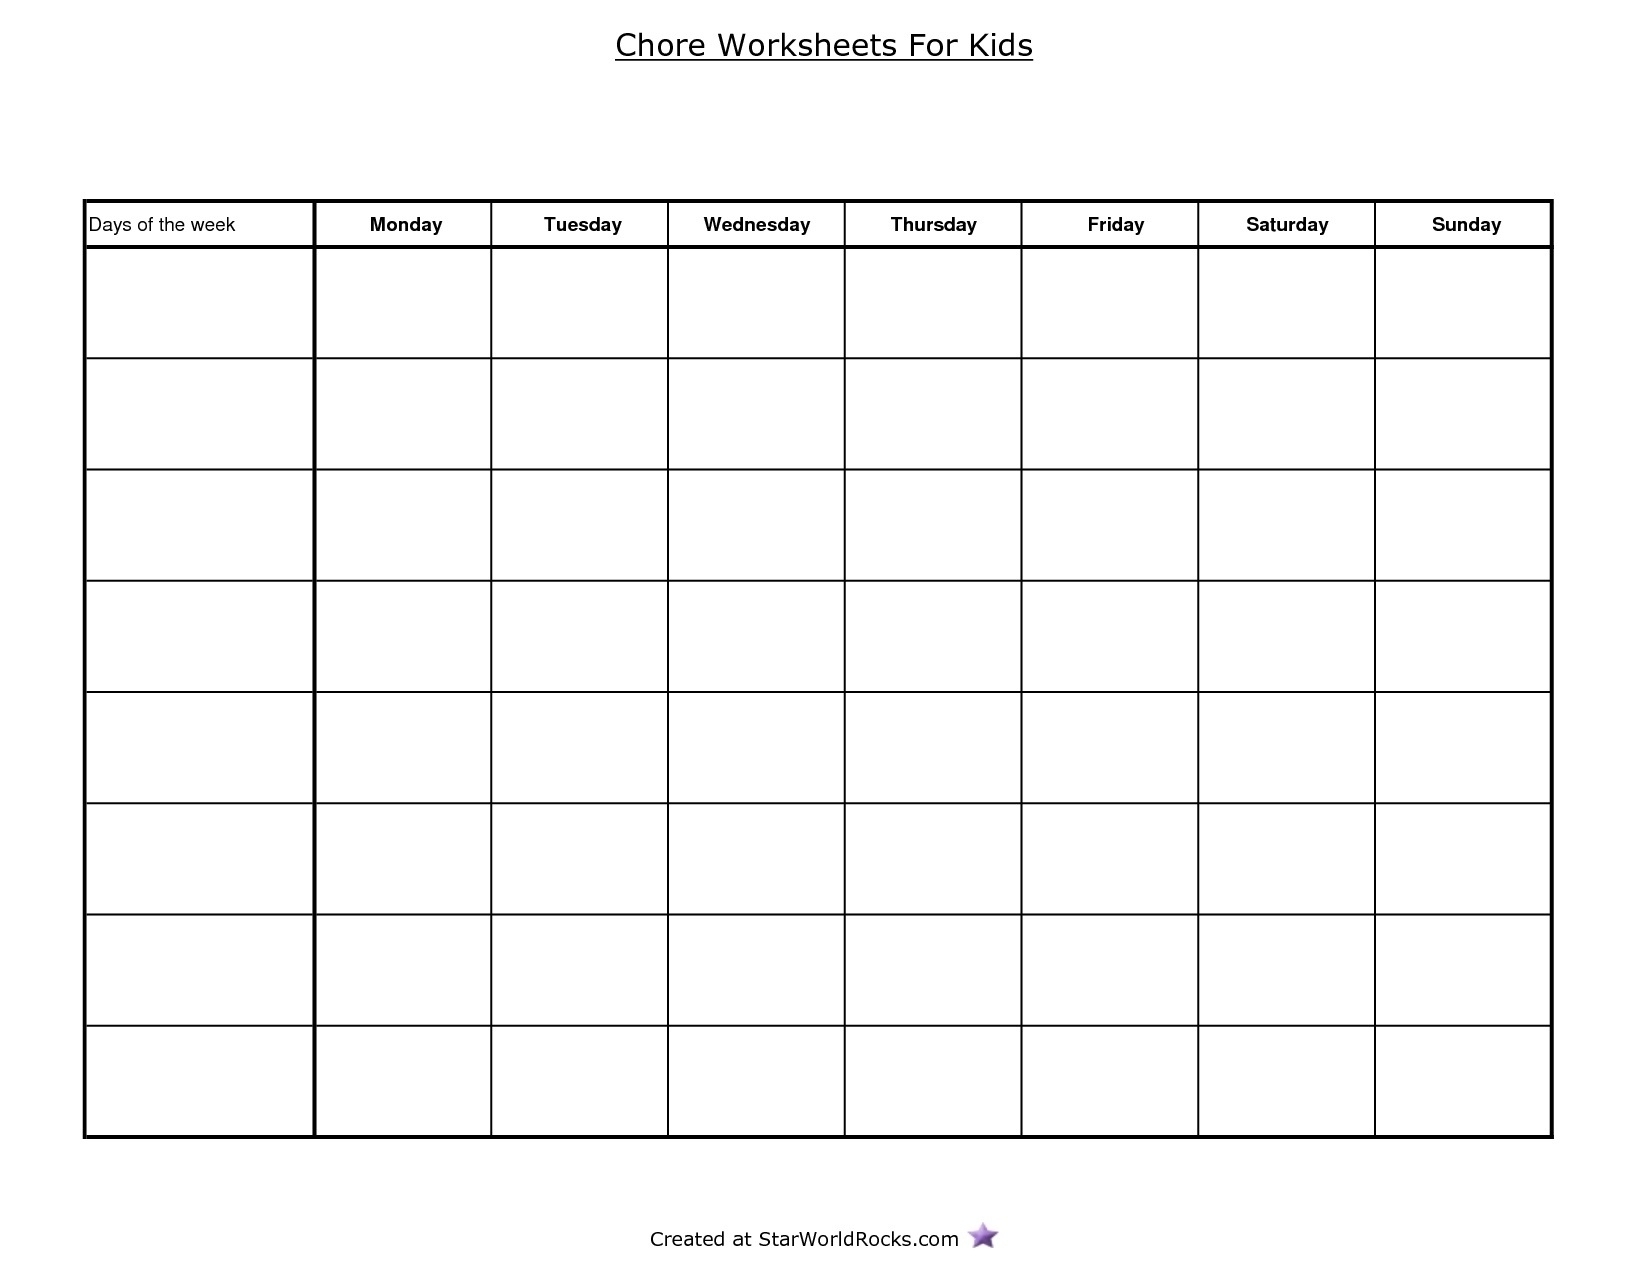 Free Printable Blank Charts And Graphs | Writings And Essays Corner intended for Printable Monday To Sunday Chart